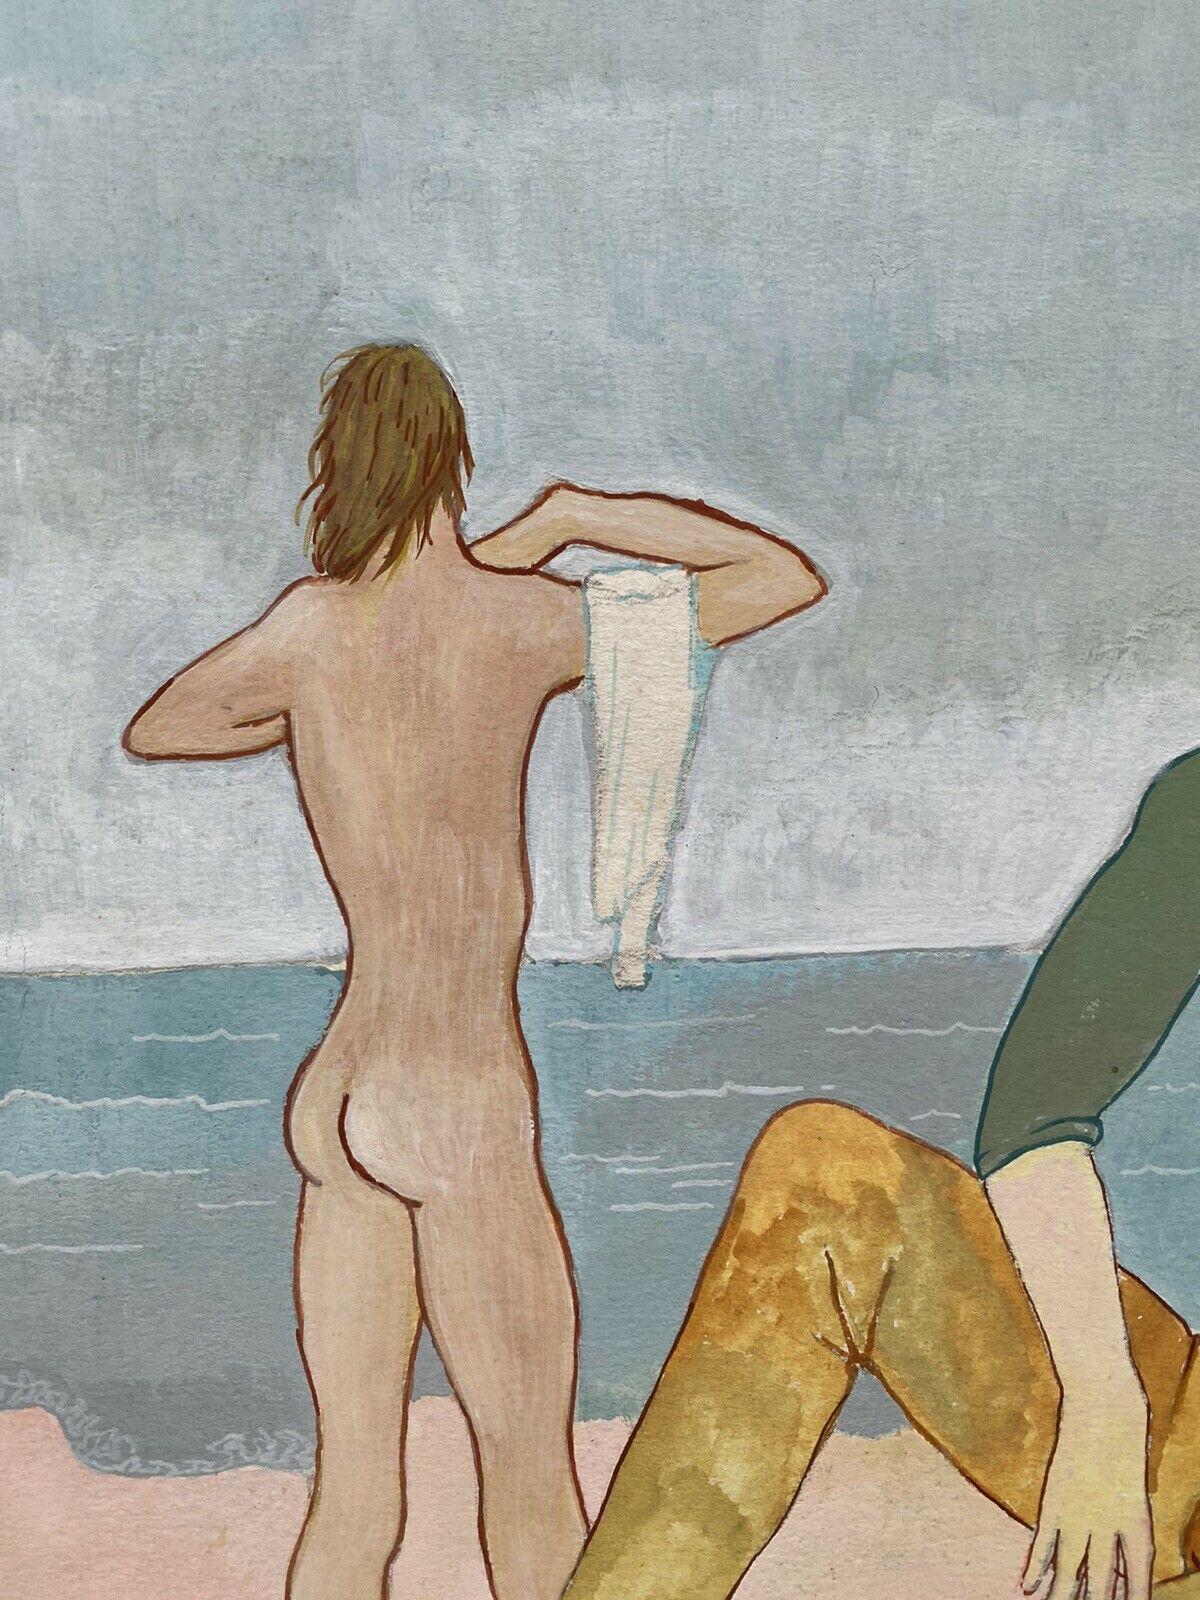 20th CENTURY FRENCH MODERNIST PAINTING - BATHERS ON THE BEACH - Modern Painting by Jean Marc